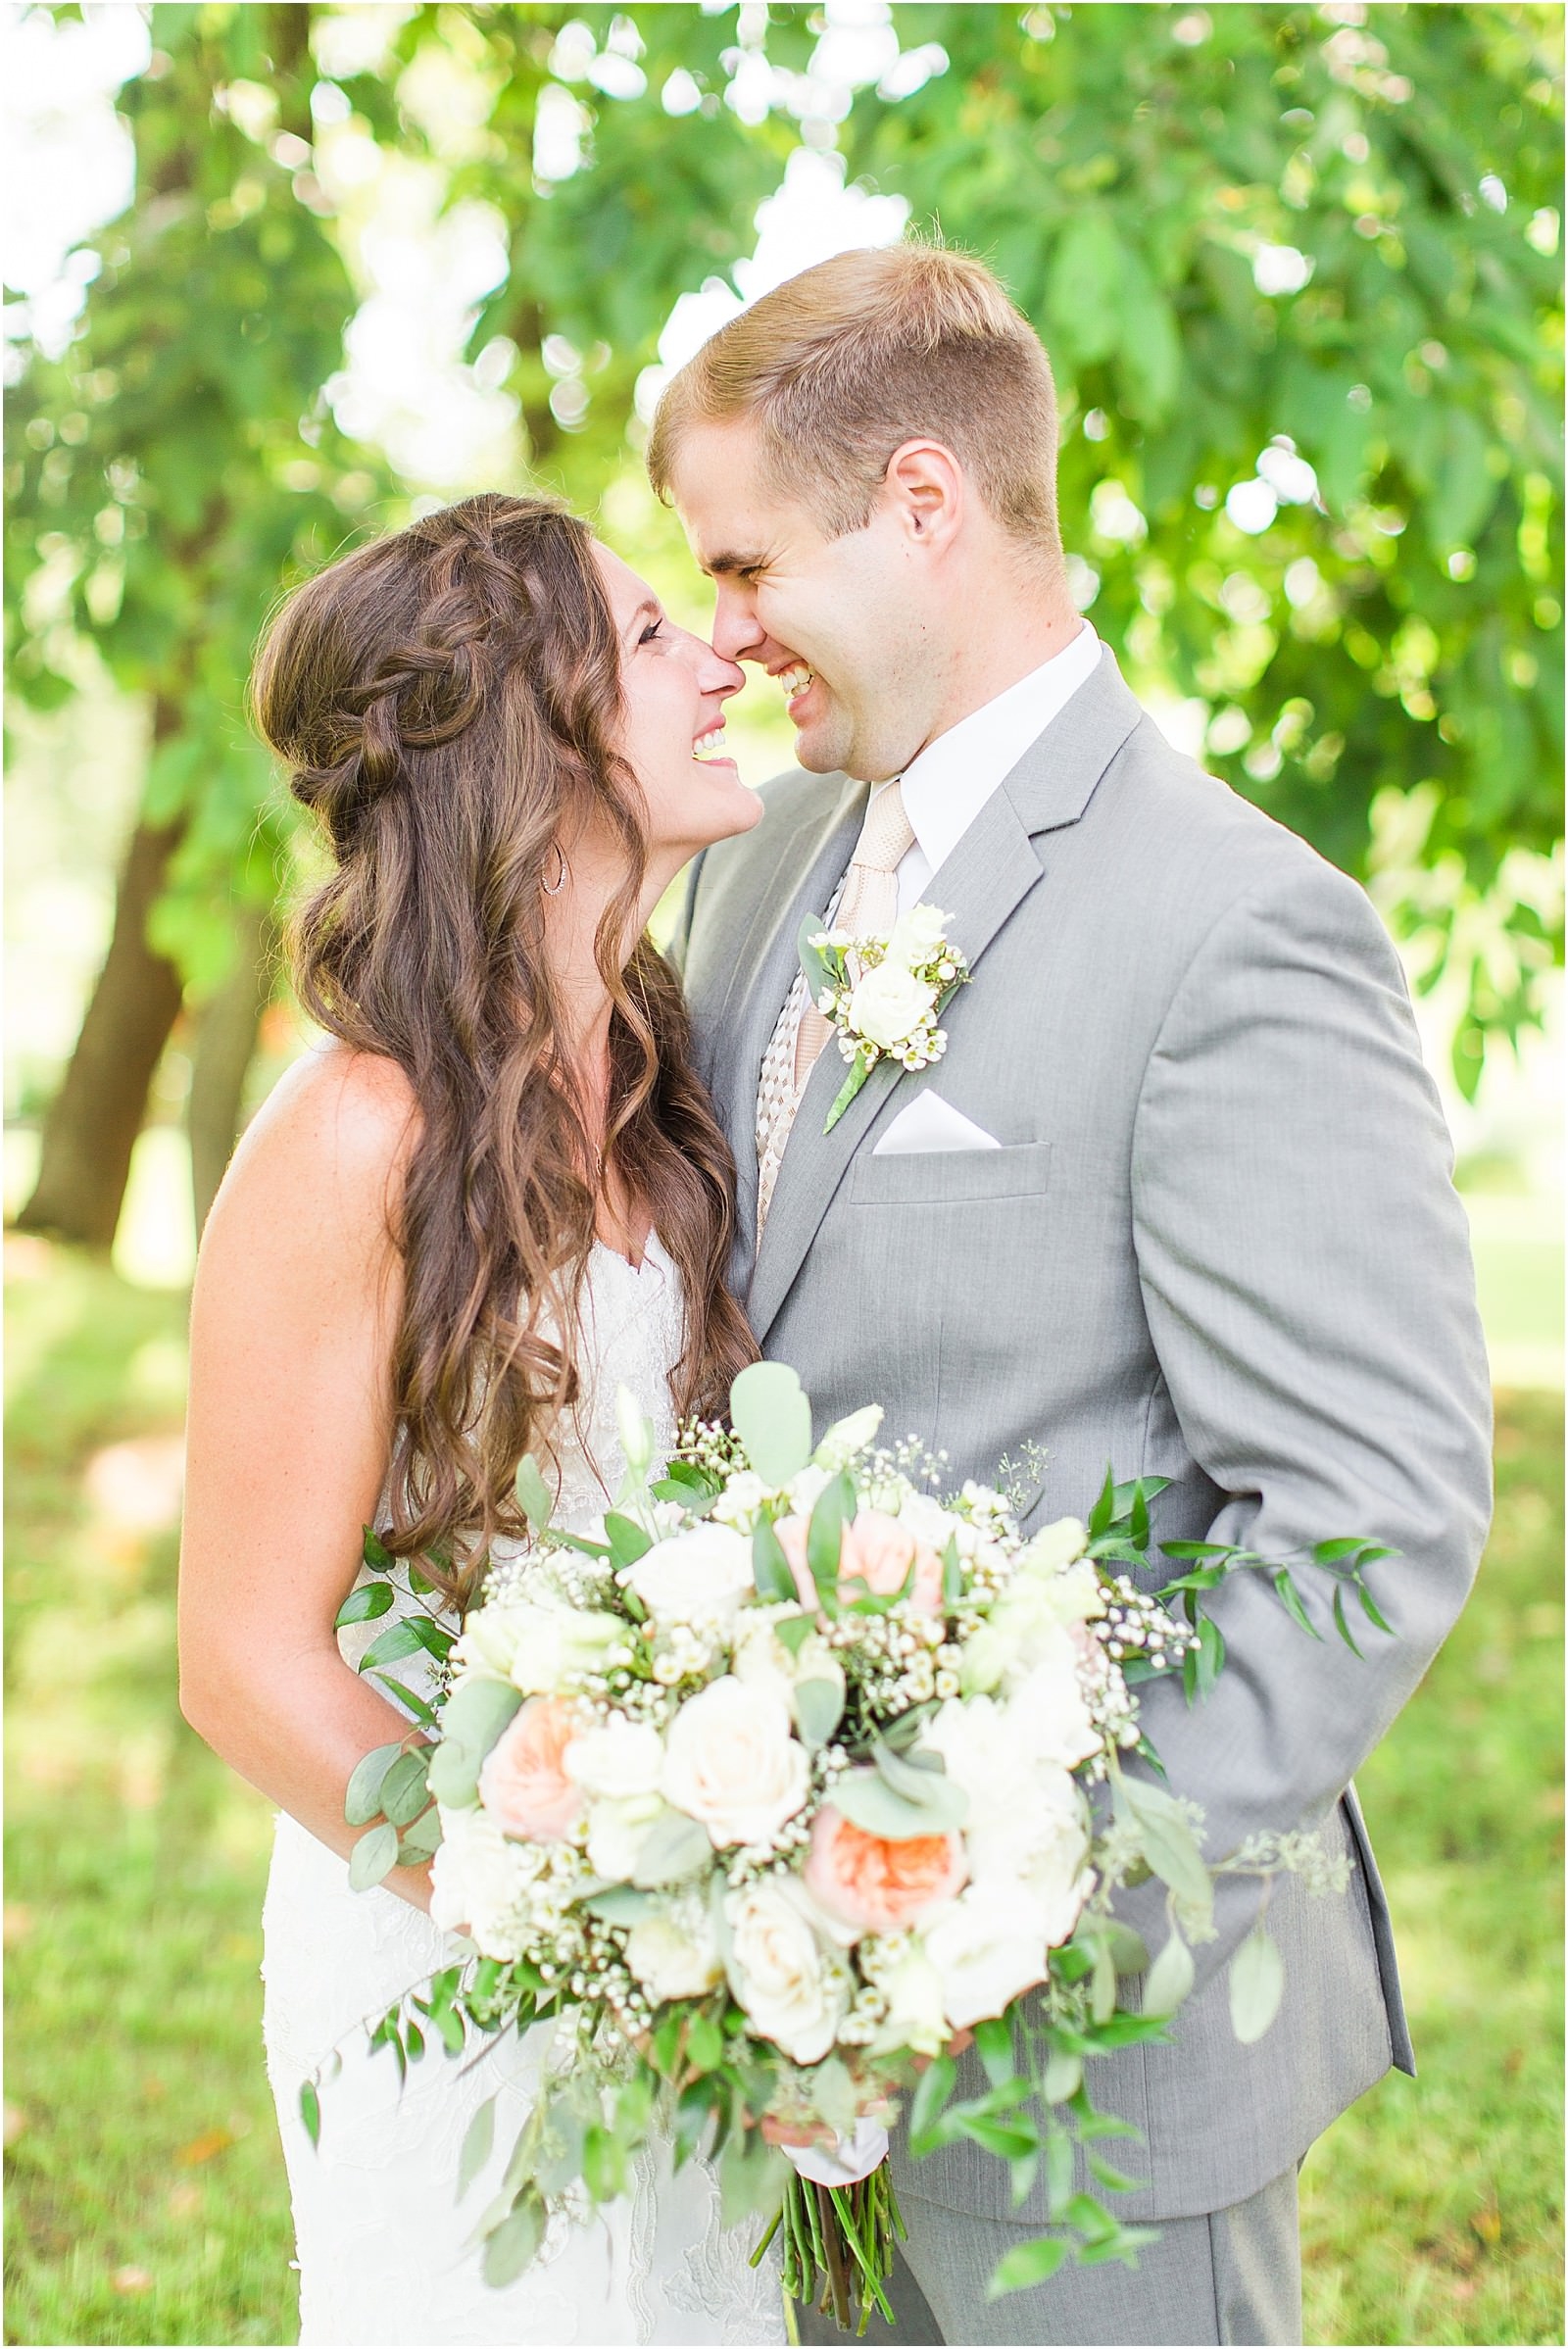 Stacey and Thomas | Blog055.jpg